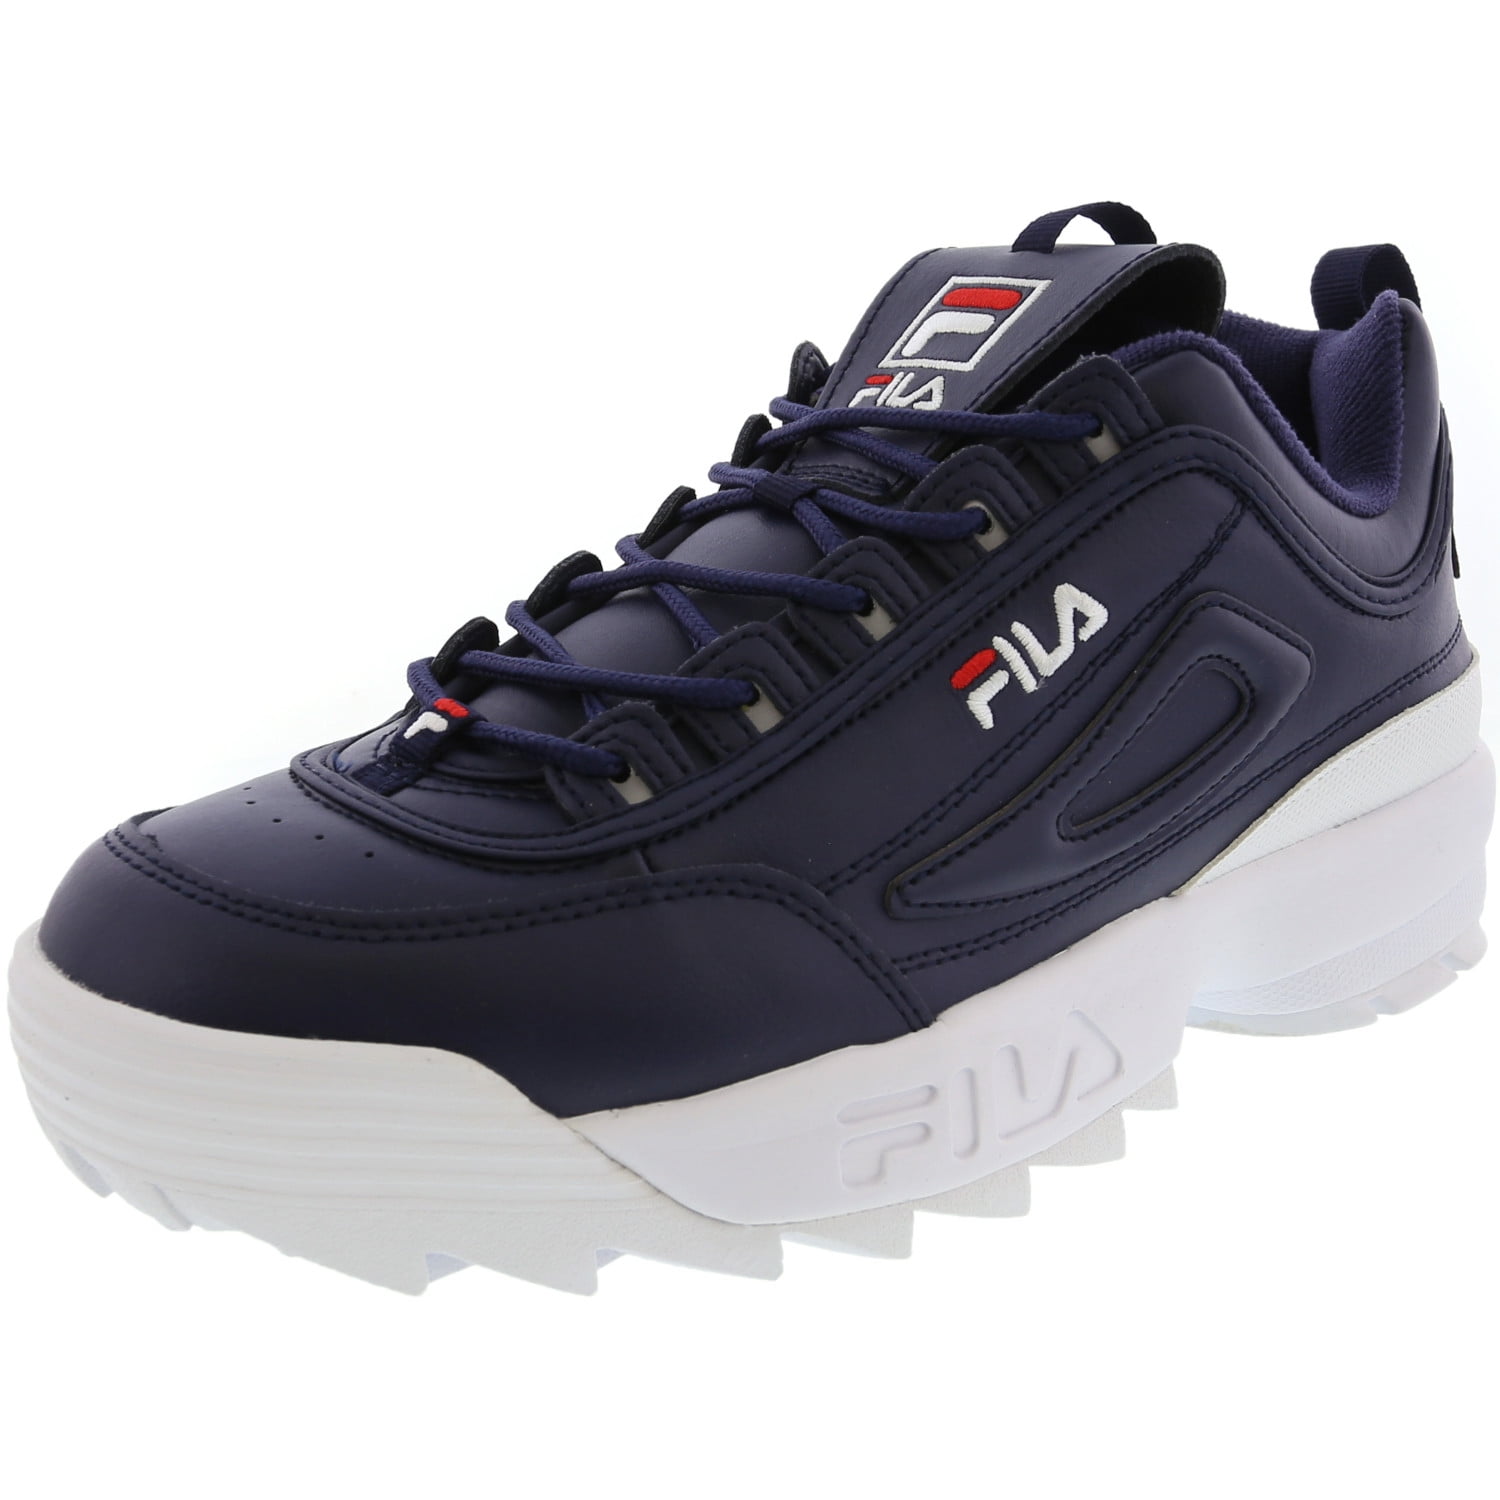 Fila Men's Disruptor II Casual Athletic Sneakers from Finish Line